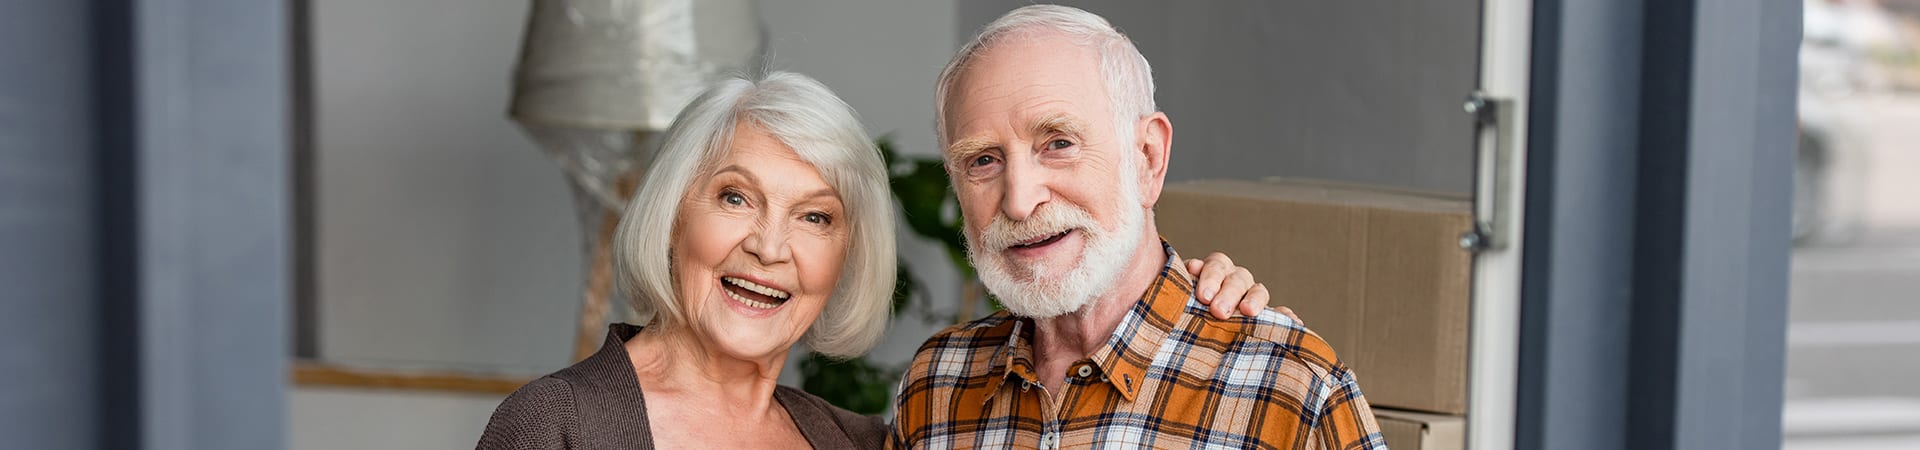 A senior couple posing together and smiling